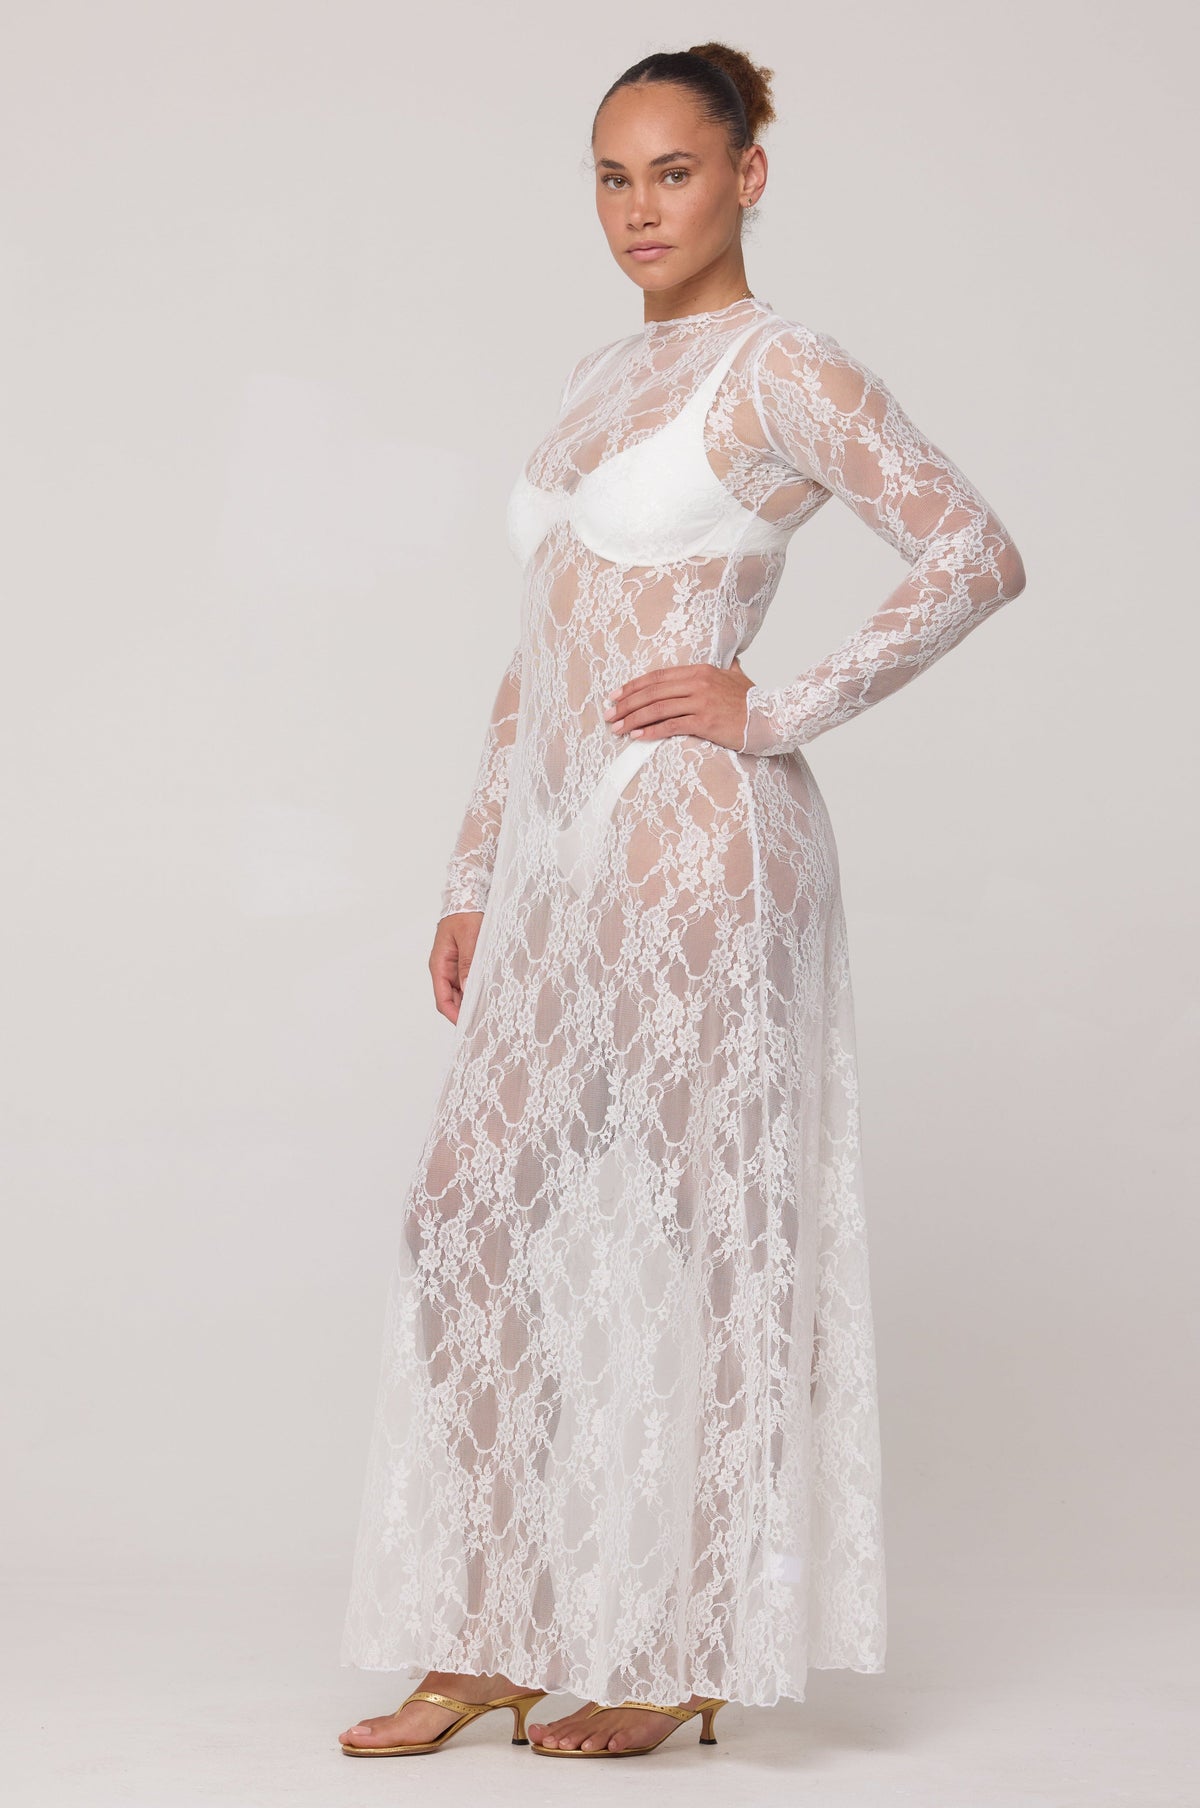 This is an image of Lyon Lace Dress in White Lace - RESA featuring a model wearing the dress